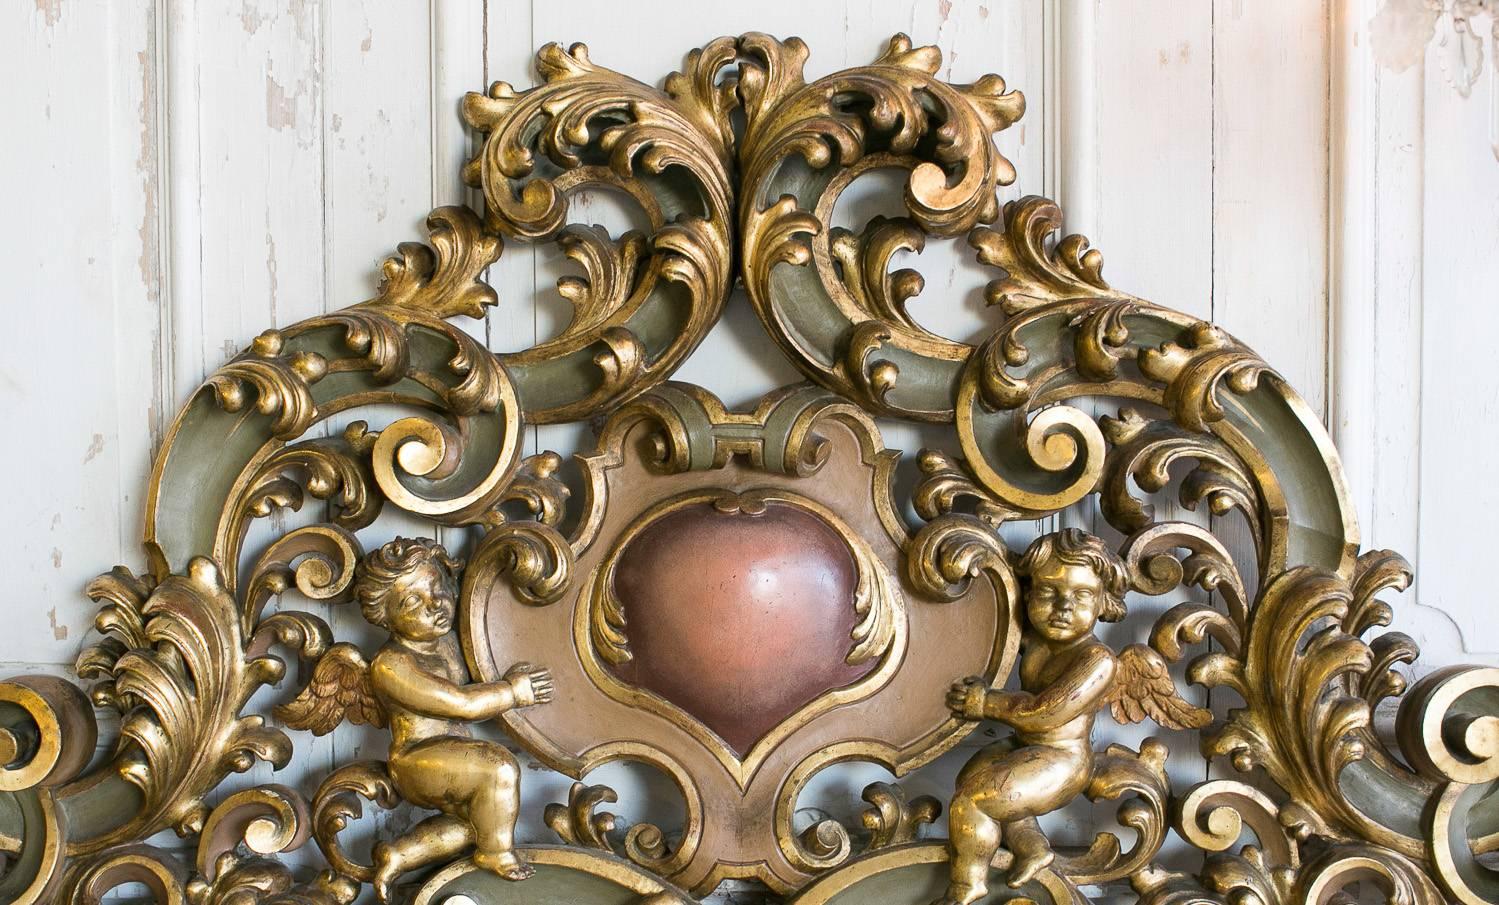 Elaborately carved Baroque-style headboard painted gilt with dark olive contrasts. This opulent queen size headboard features a heart-shaped centerpiece held by two cherubs. Stunning leaf carvings swirl and curve throughout this ornate, Italian-made